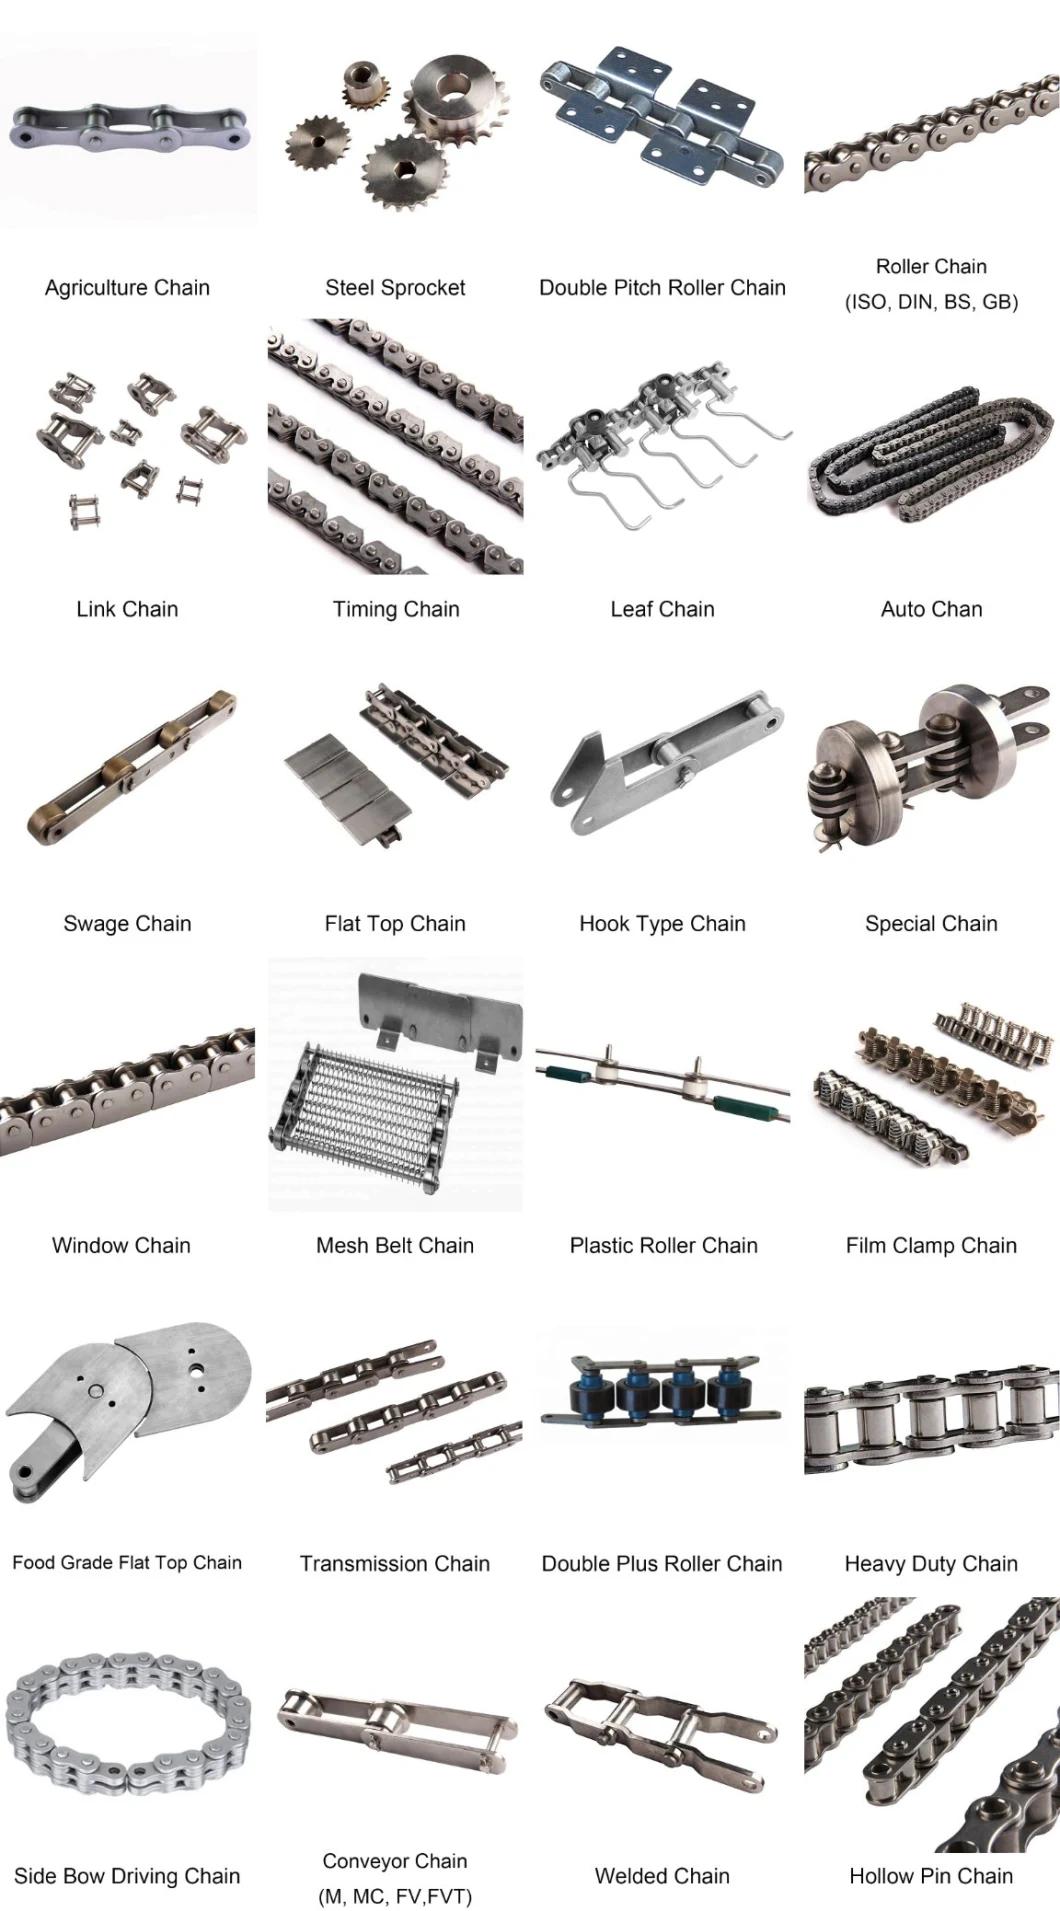 Professional High Strength Conveyor Roller Chain Manufacturer Stainless Steel Film Clamp Chain